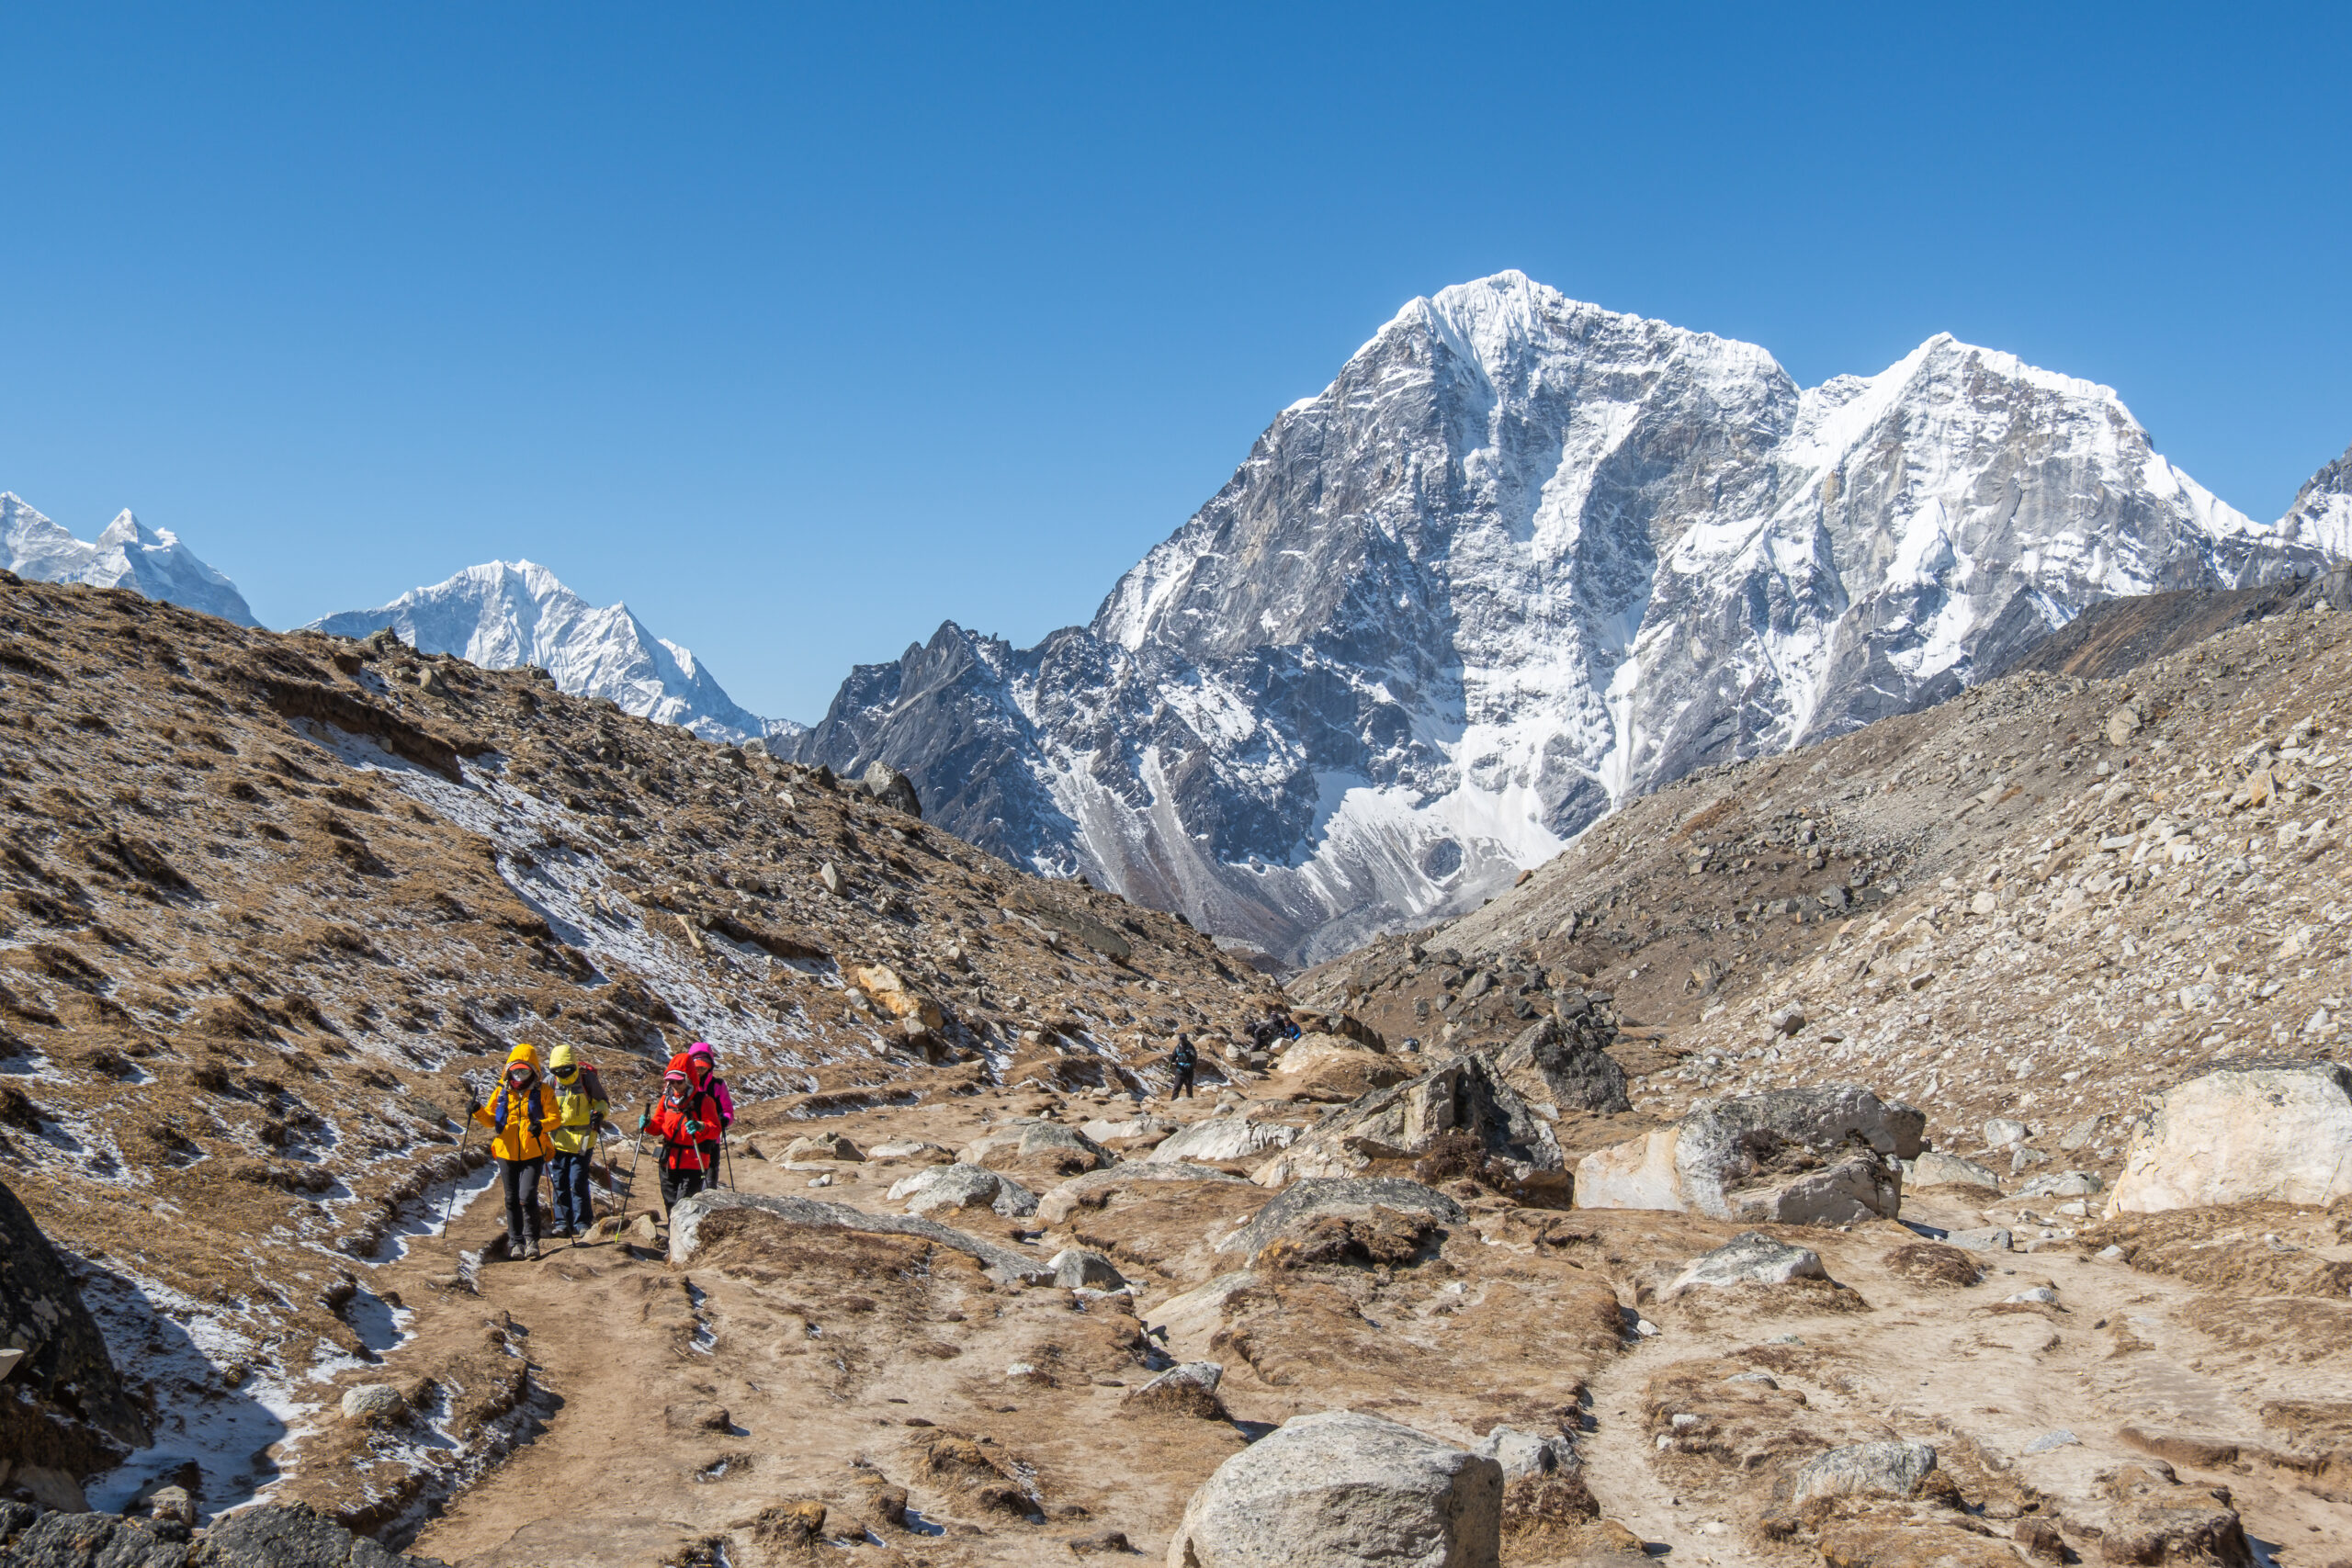 Tourist and porters walking on dirt road in Nepal to Everest Base Camp